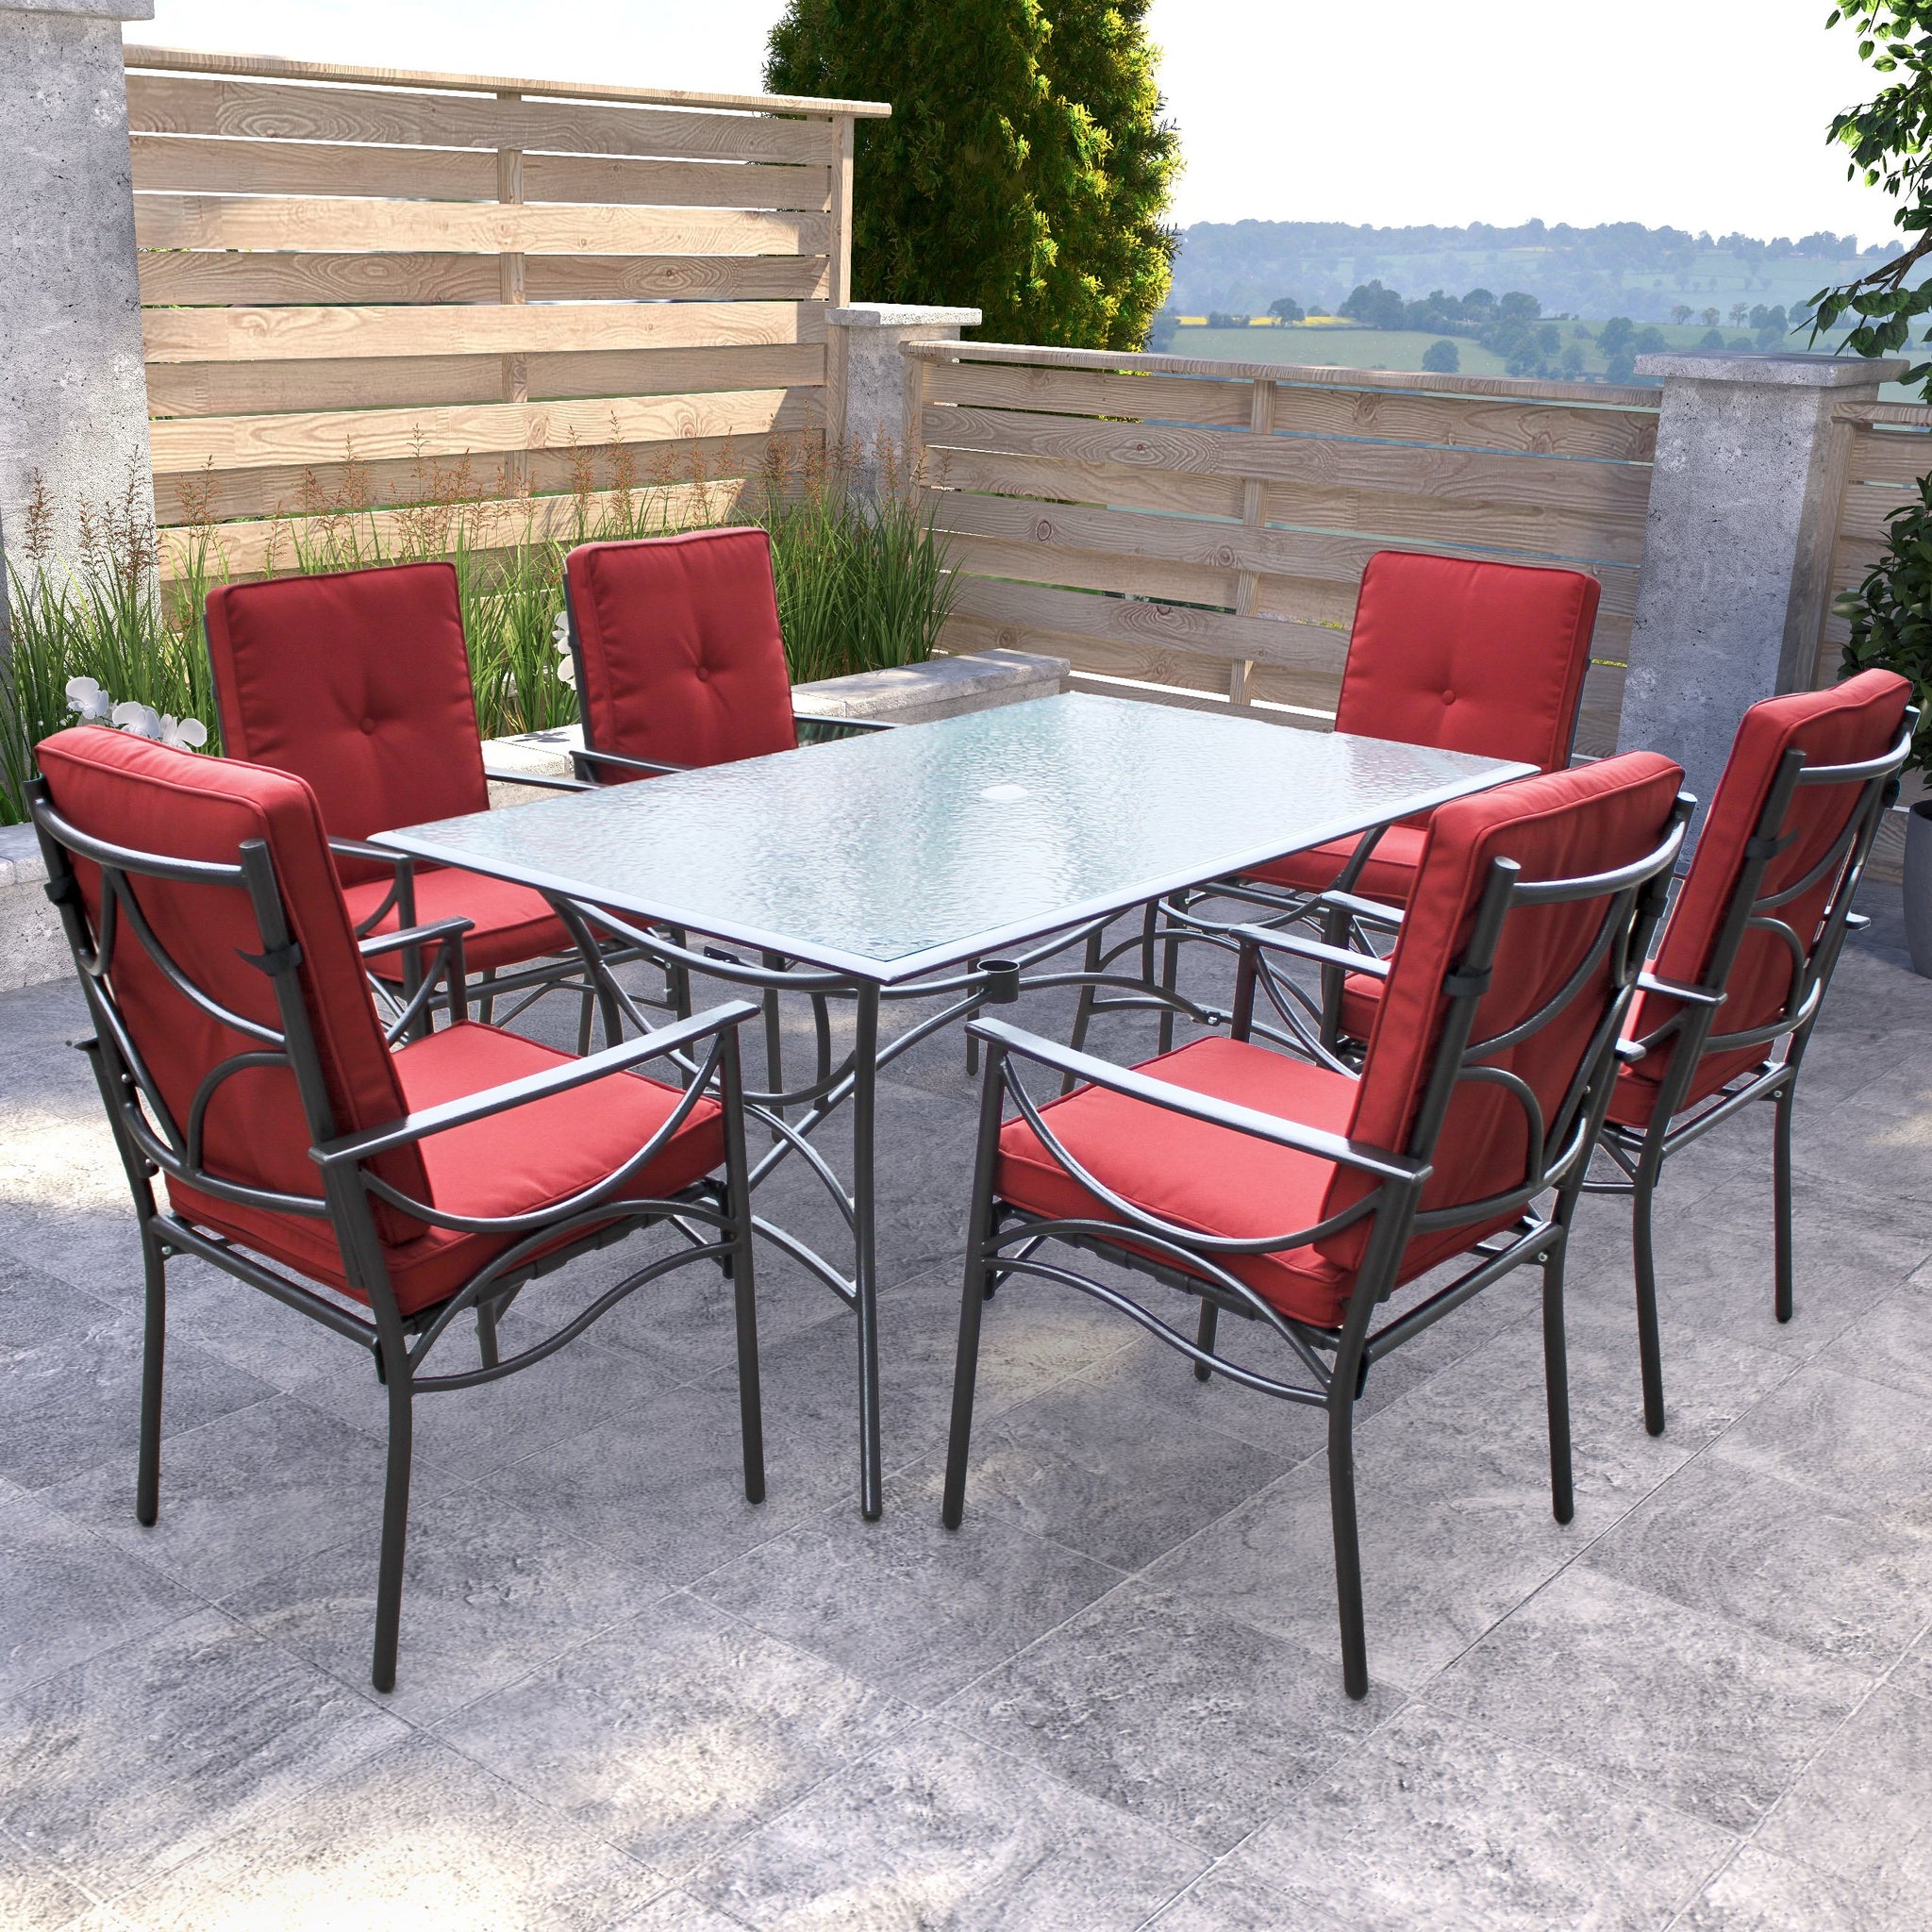 Charcoal Black And Red Patio Dining Set 7pc Clearance Final Sale Corliving Furniture Us